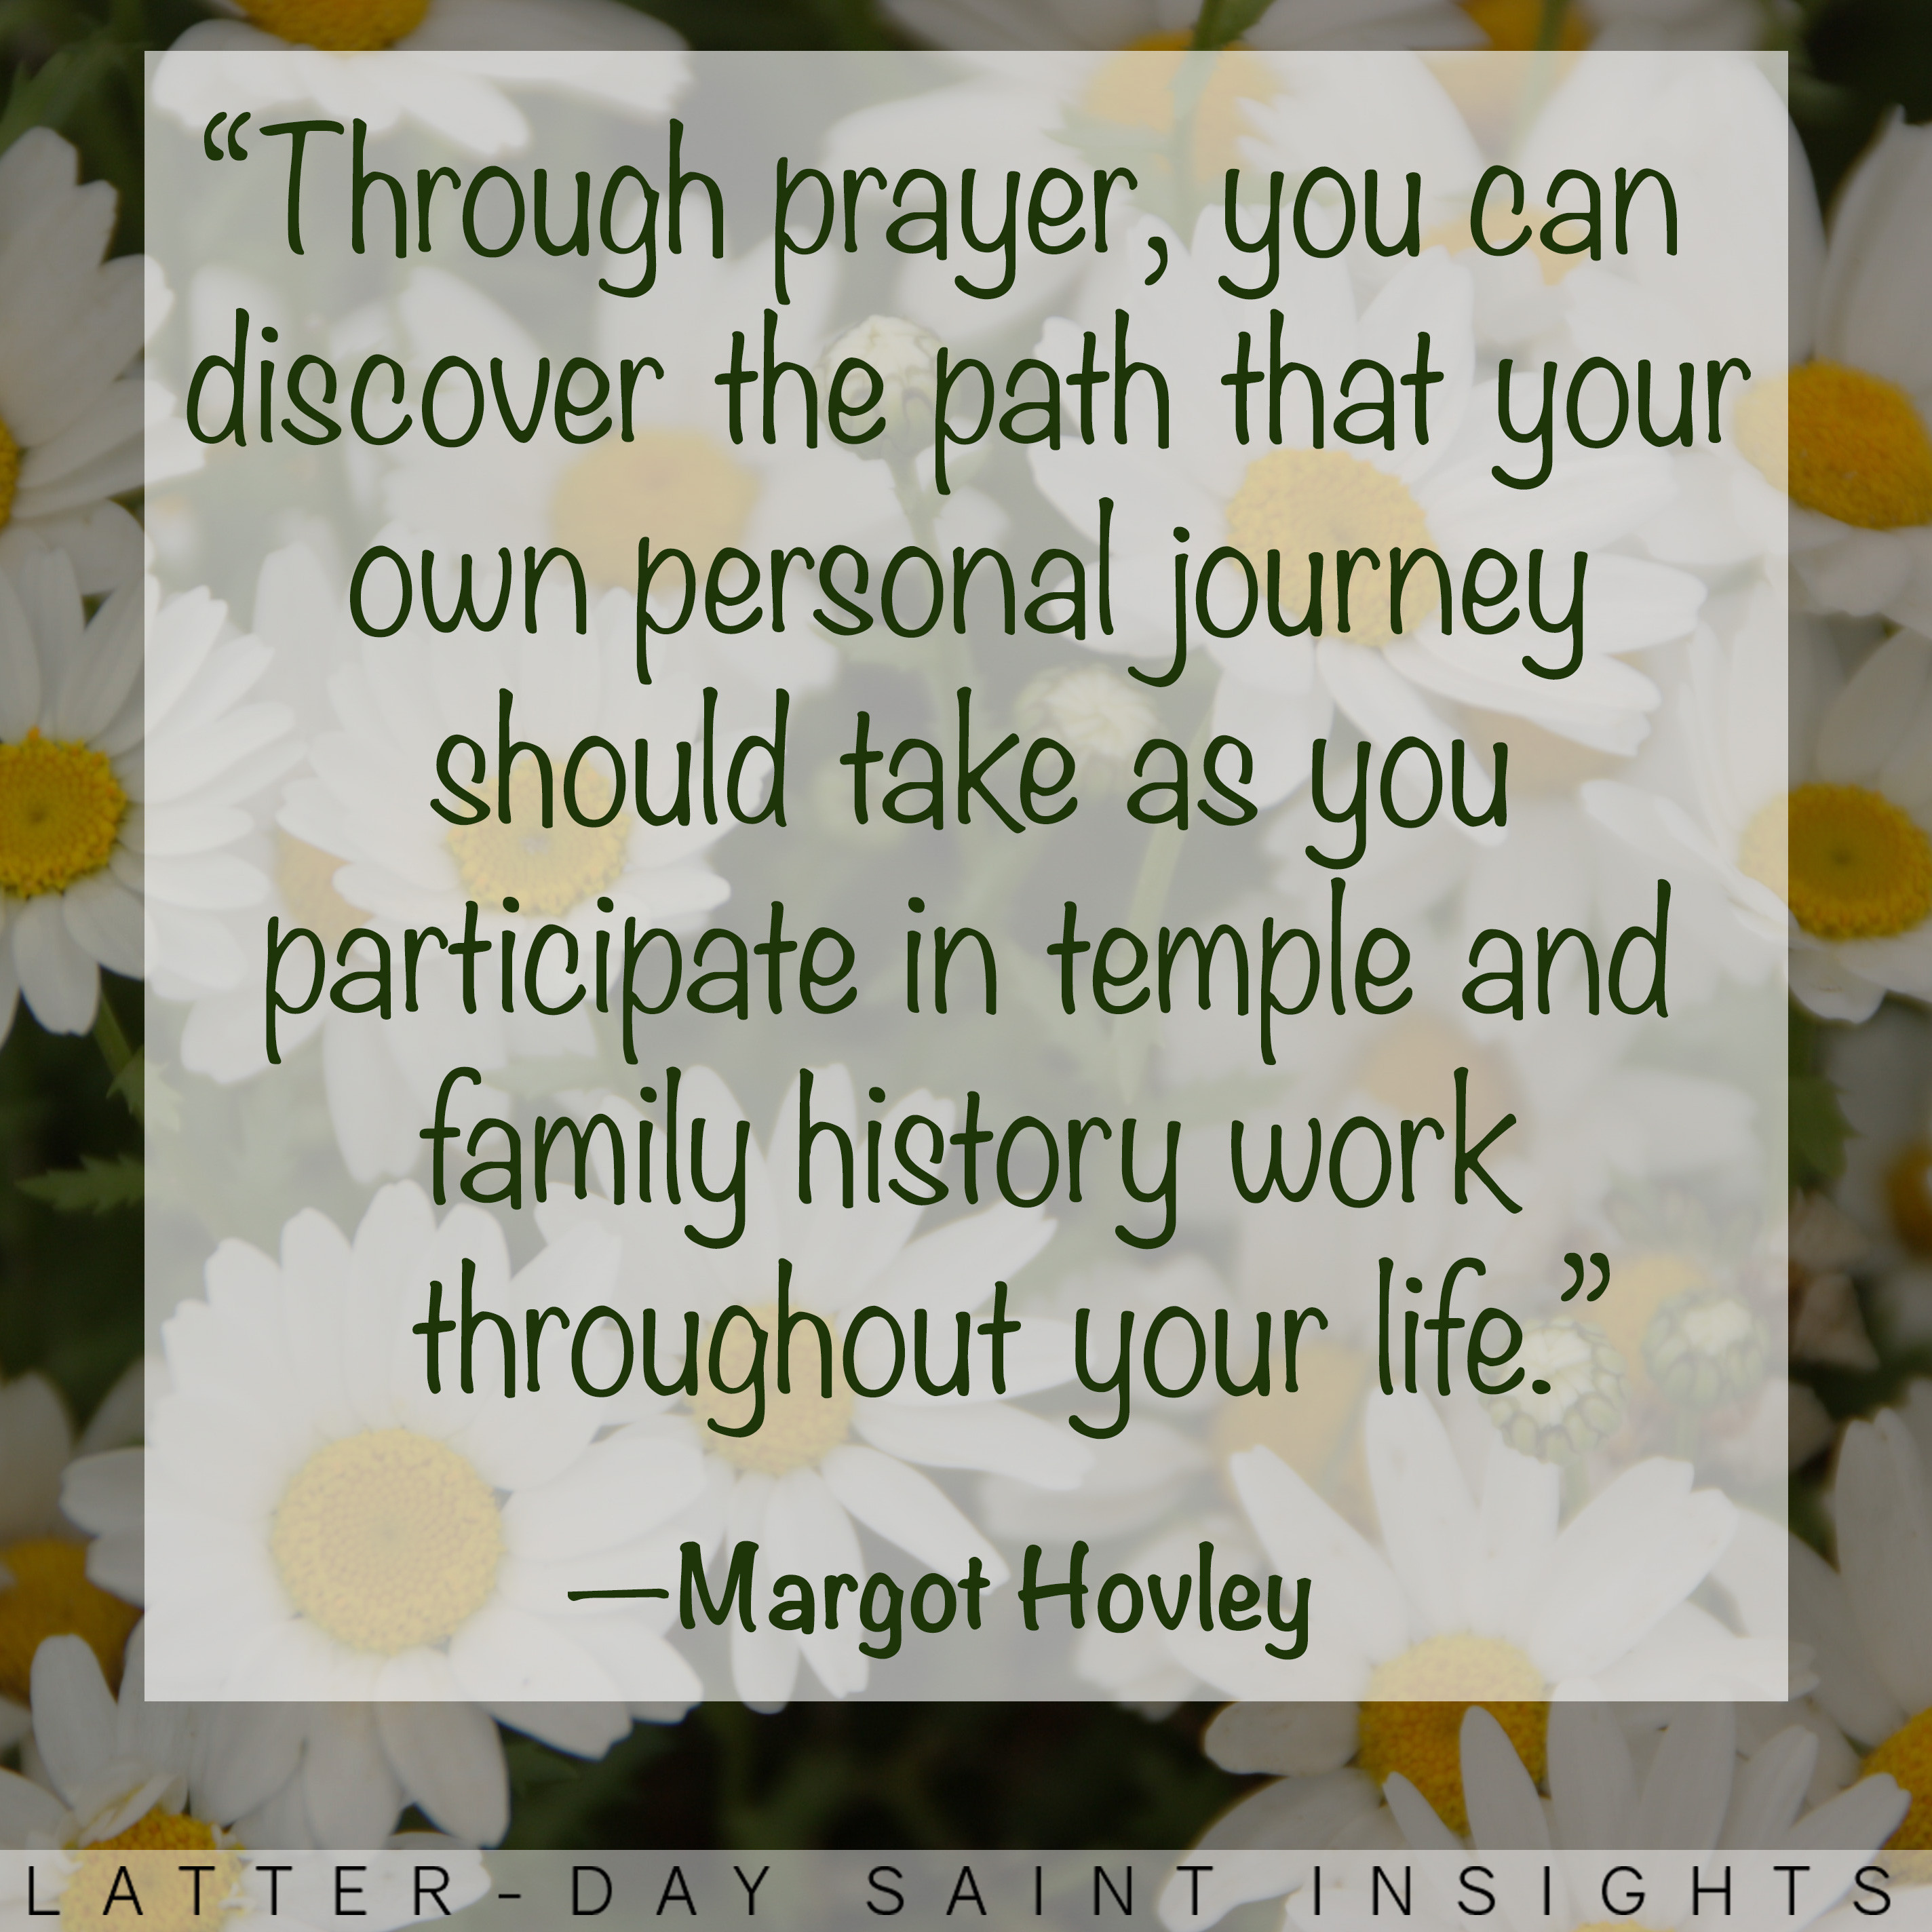 "Through prayer, you can discover the path that your own personal journey should take as you participate in temple and family history work throughout your life." —Margot Hovley